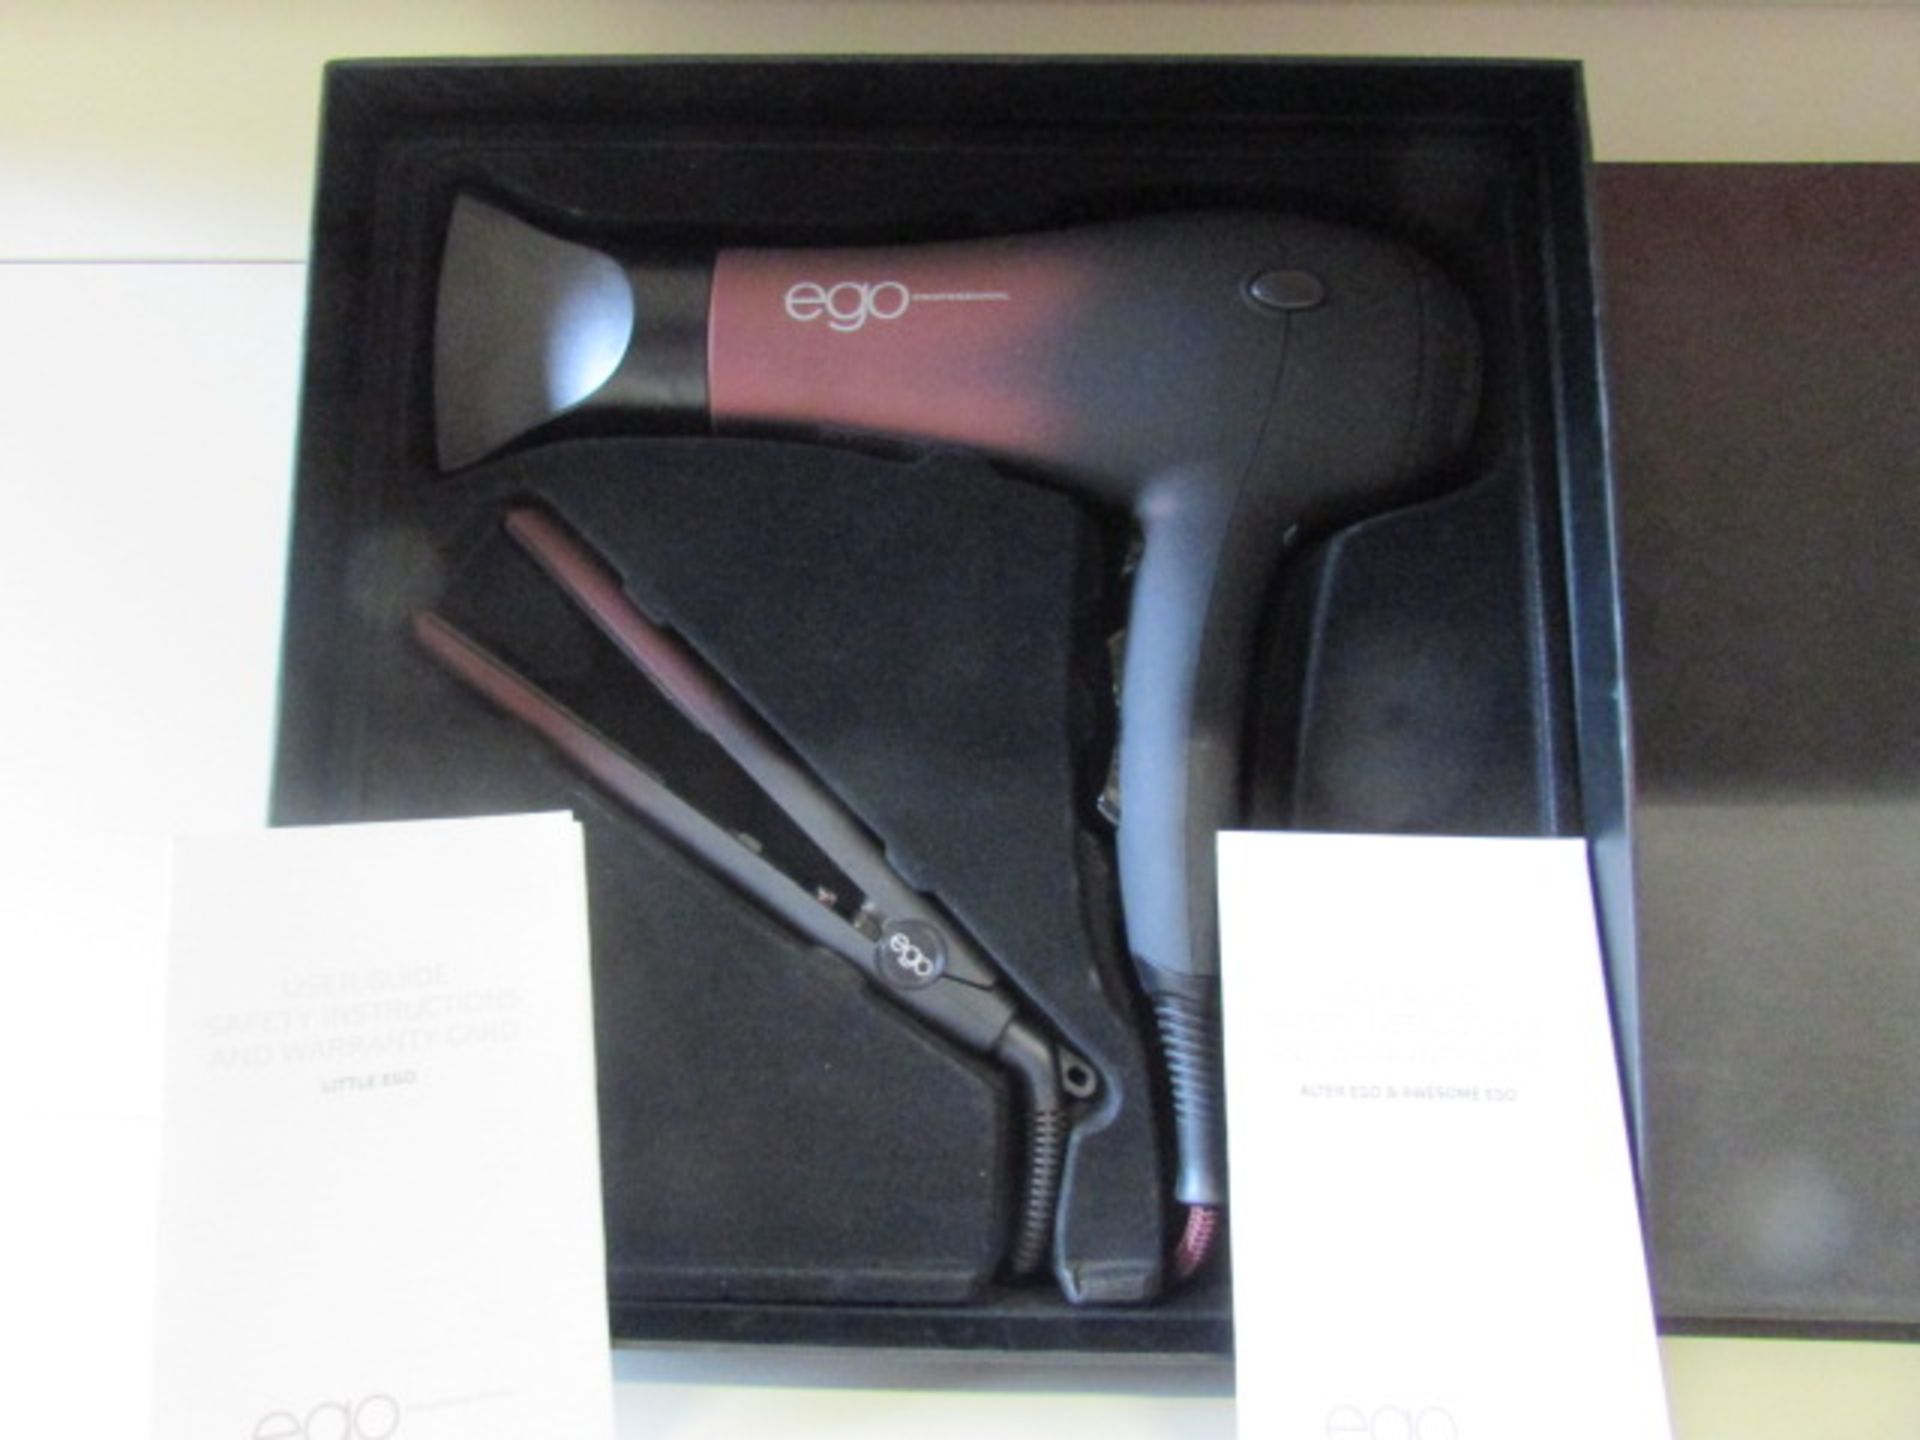 5 x Ego Professional Full On And Fabulous Ego Set (Alter Ego Hairdryer And Little Iron) [Grade A]